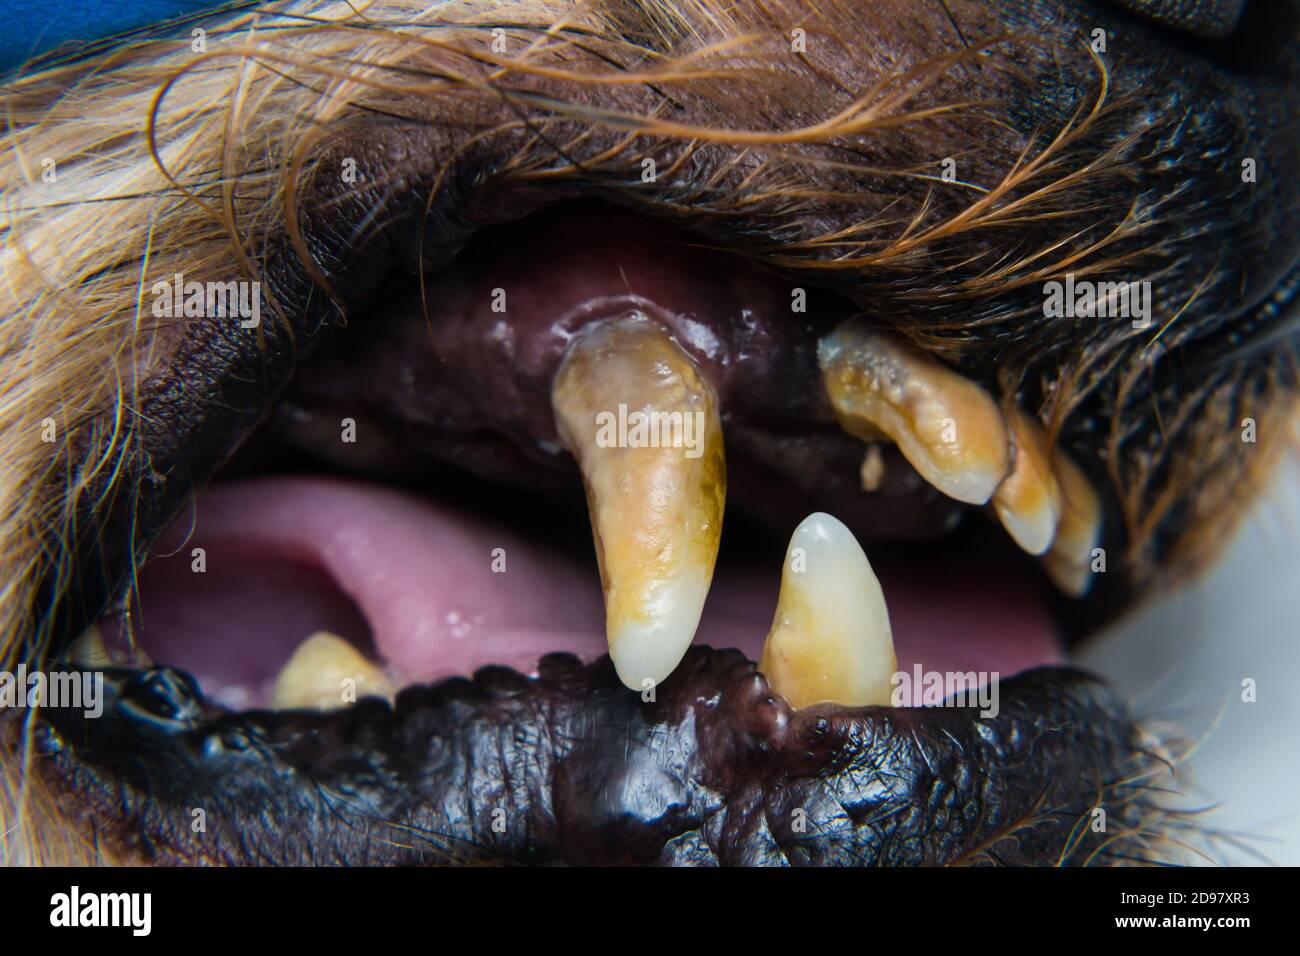 close-up photo of a dog teeth with tartar or bacterial plaque Stock Photo